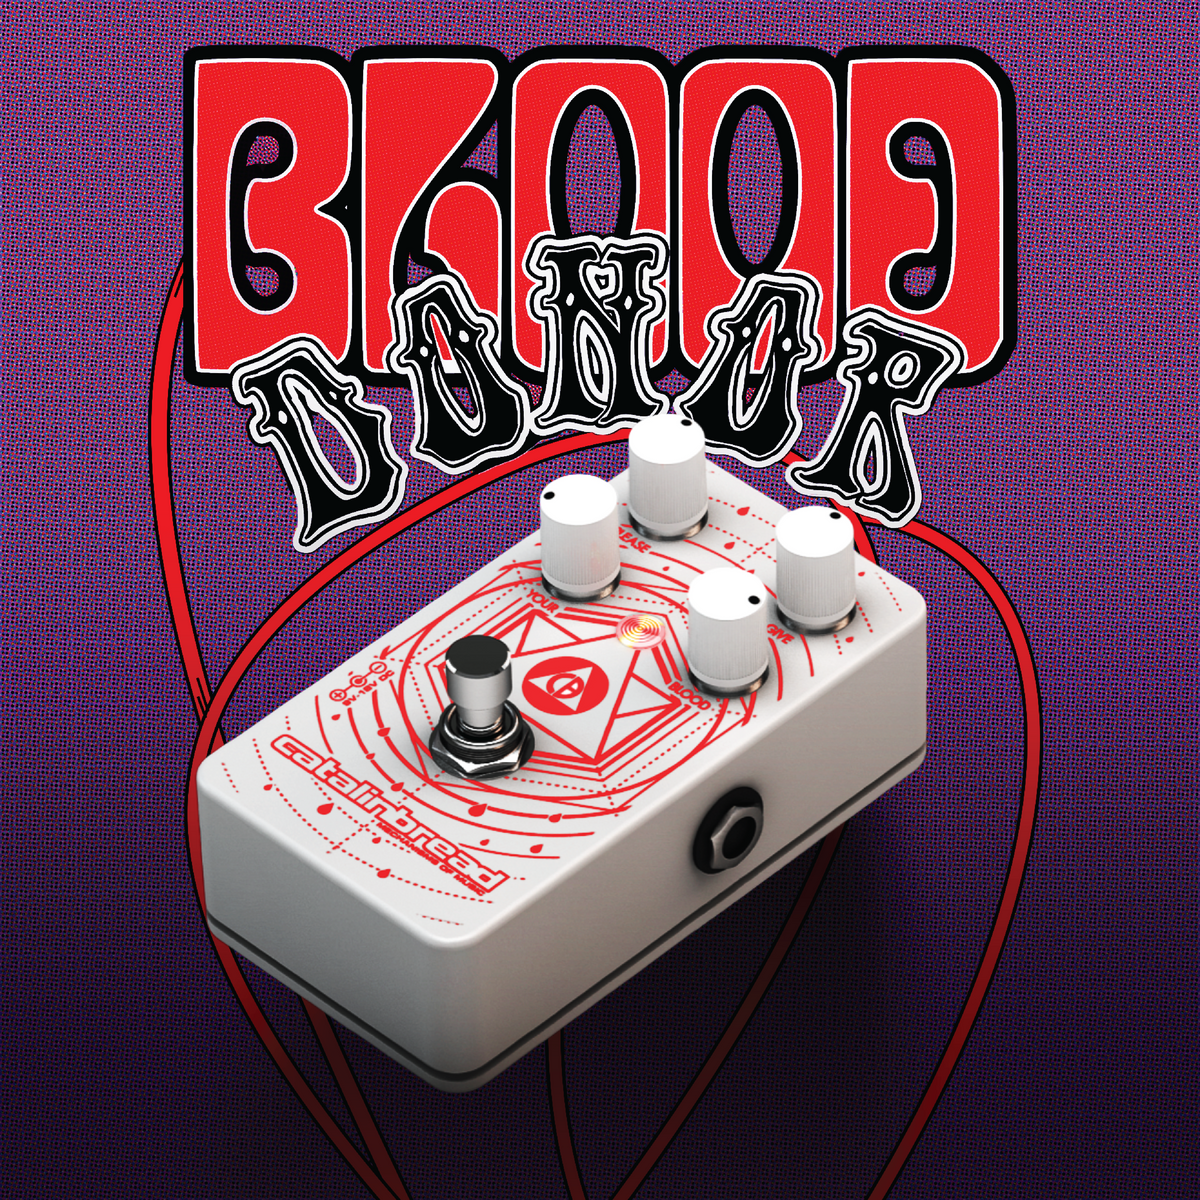 Catalinbread Releases Blood Donor for Charity – Catalinbread Effects